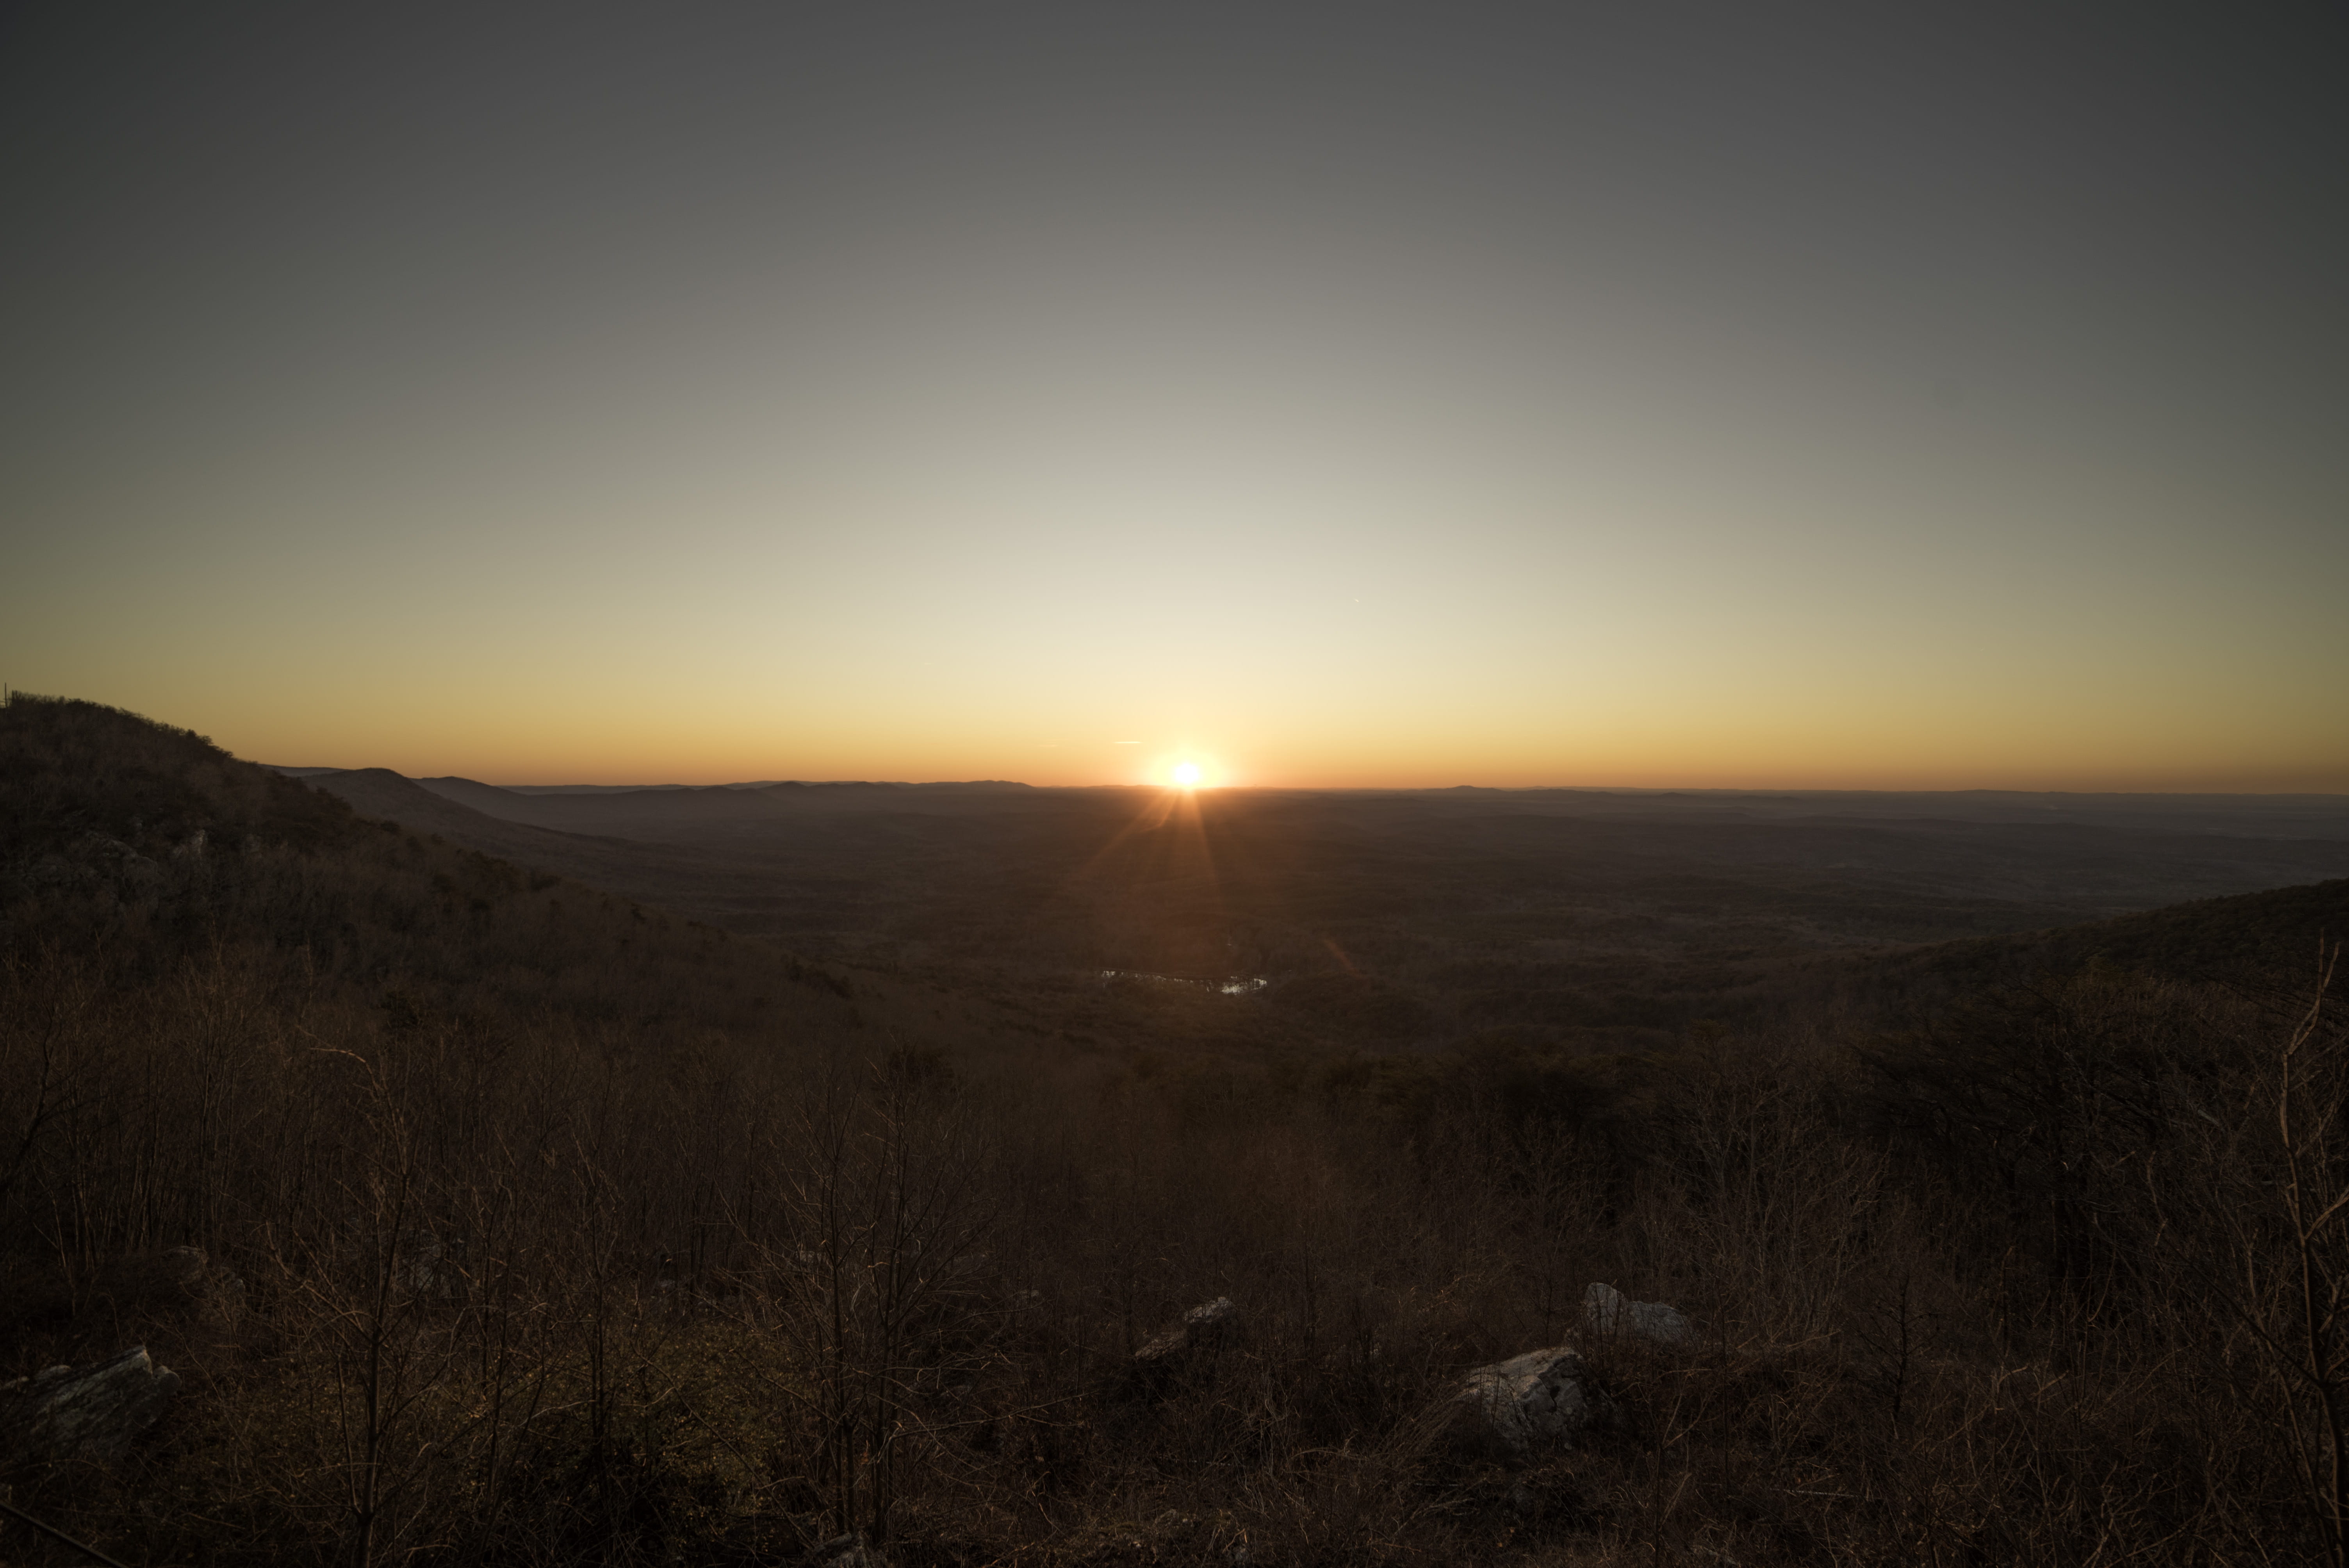 united states, delta, cheaha state park, scenic, overlook, sunset